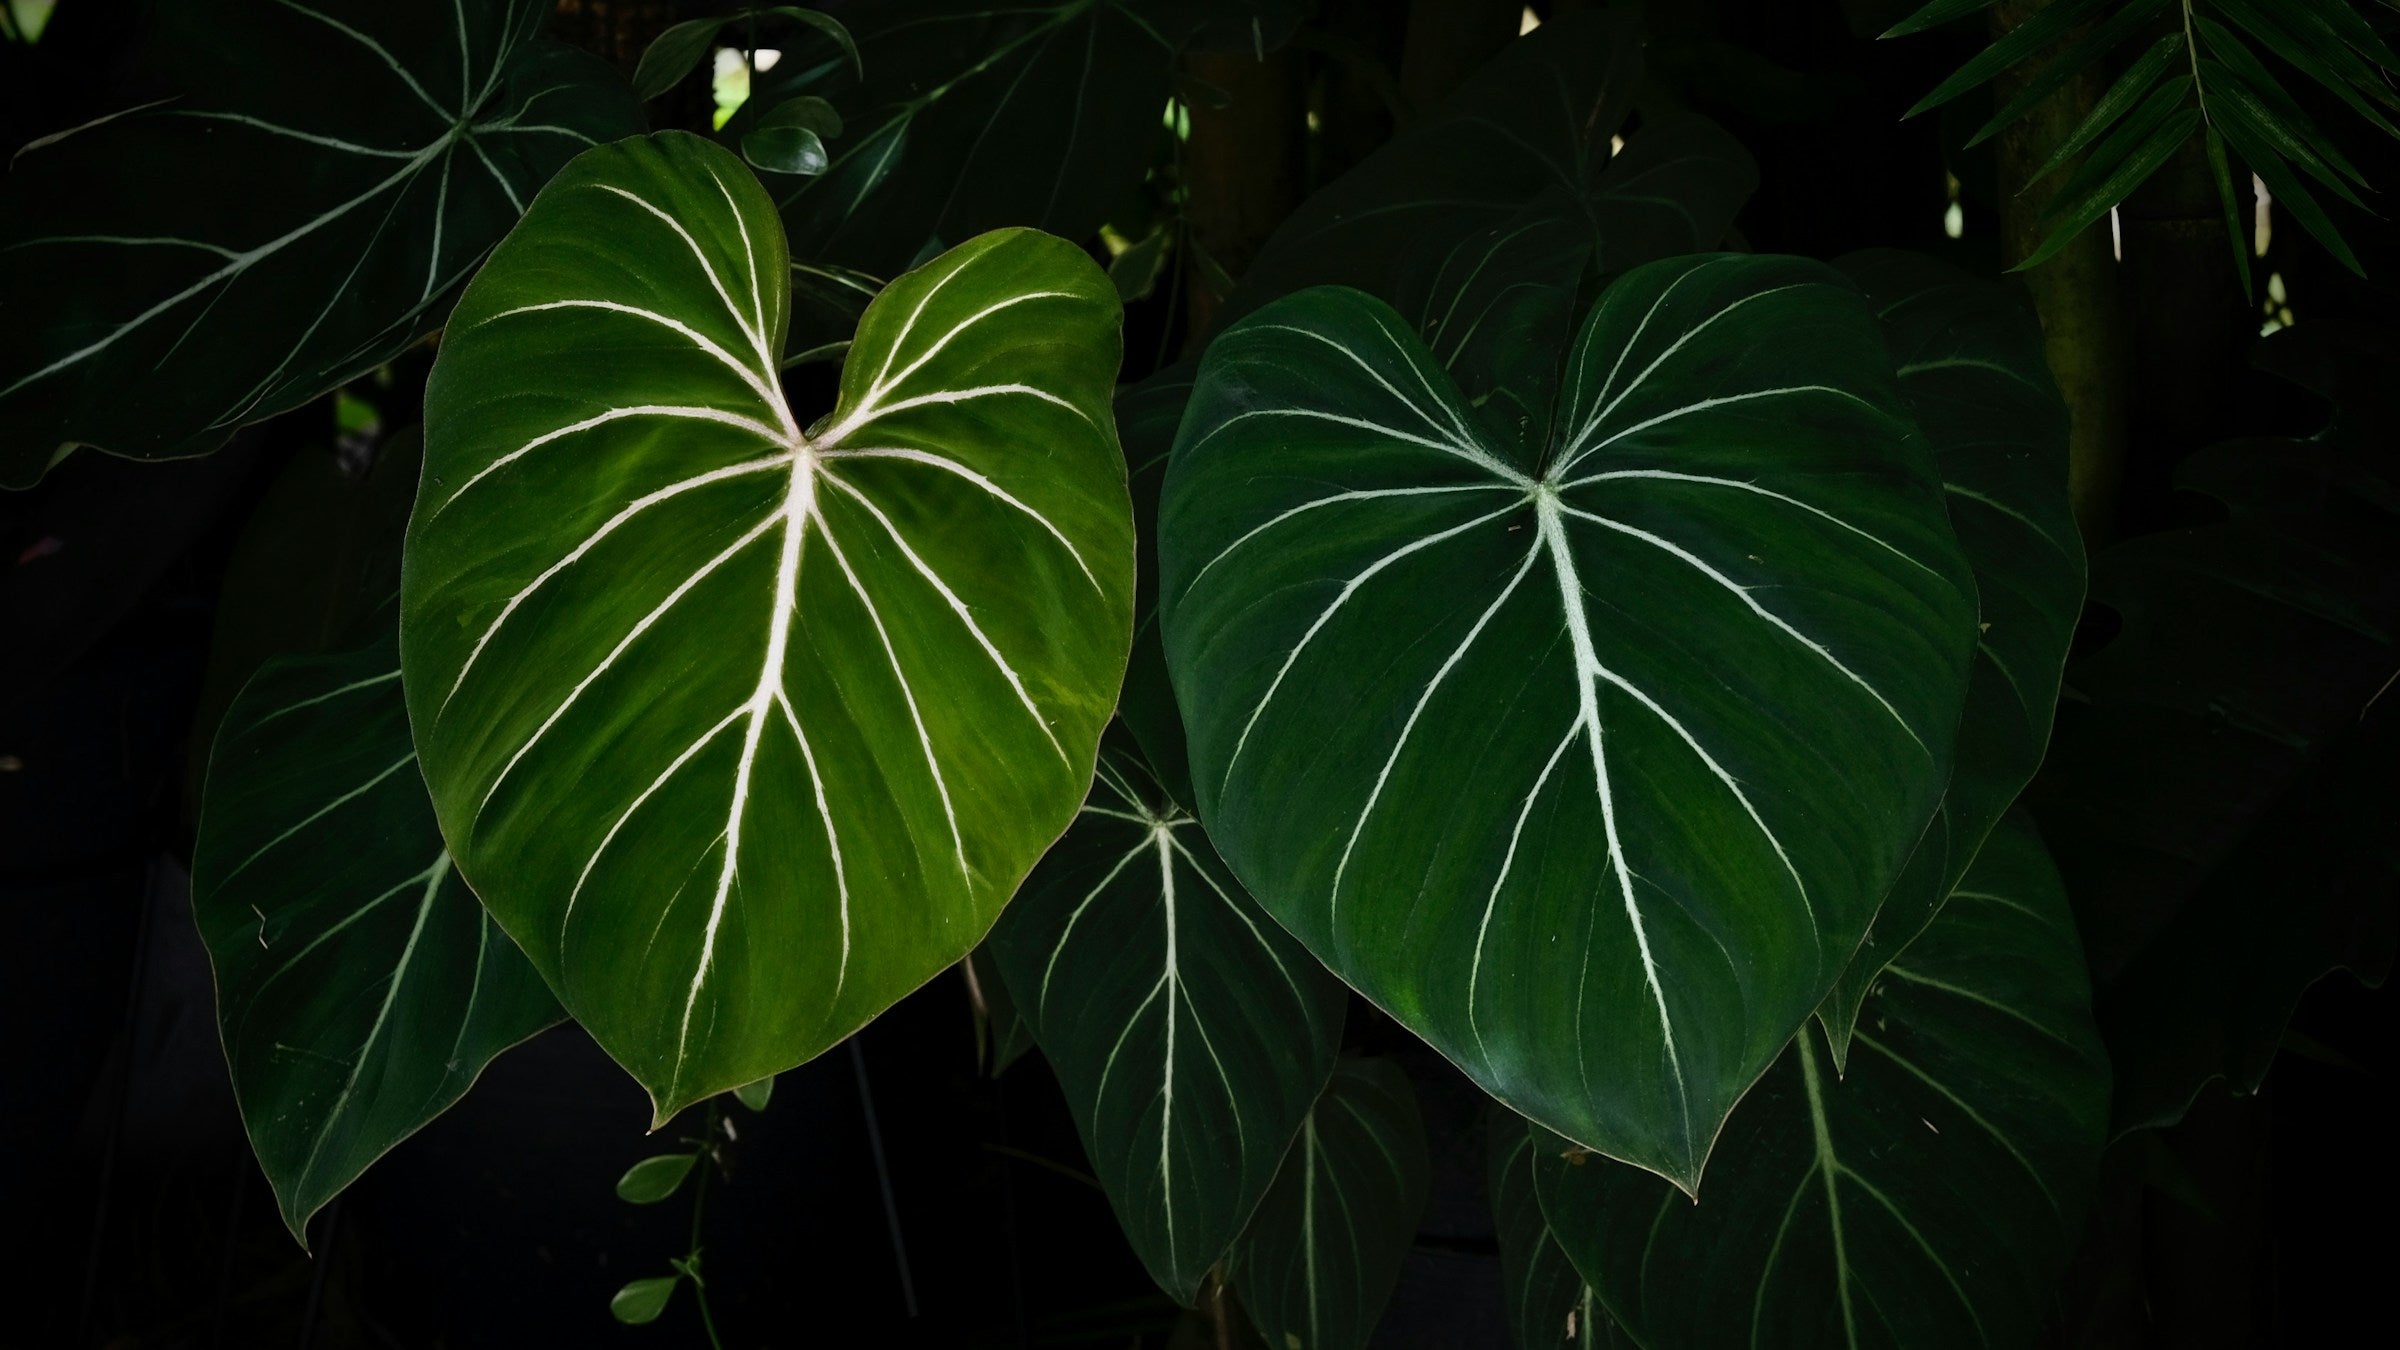 What are Philodendron plants?